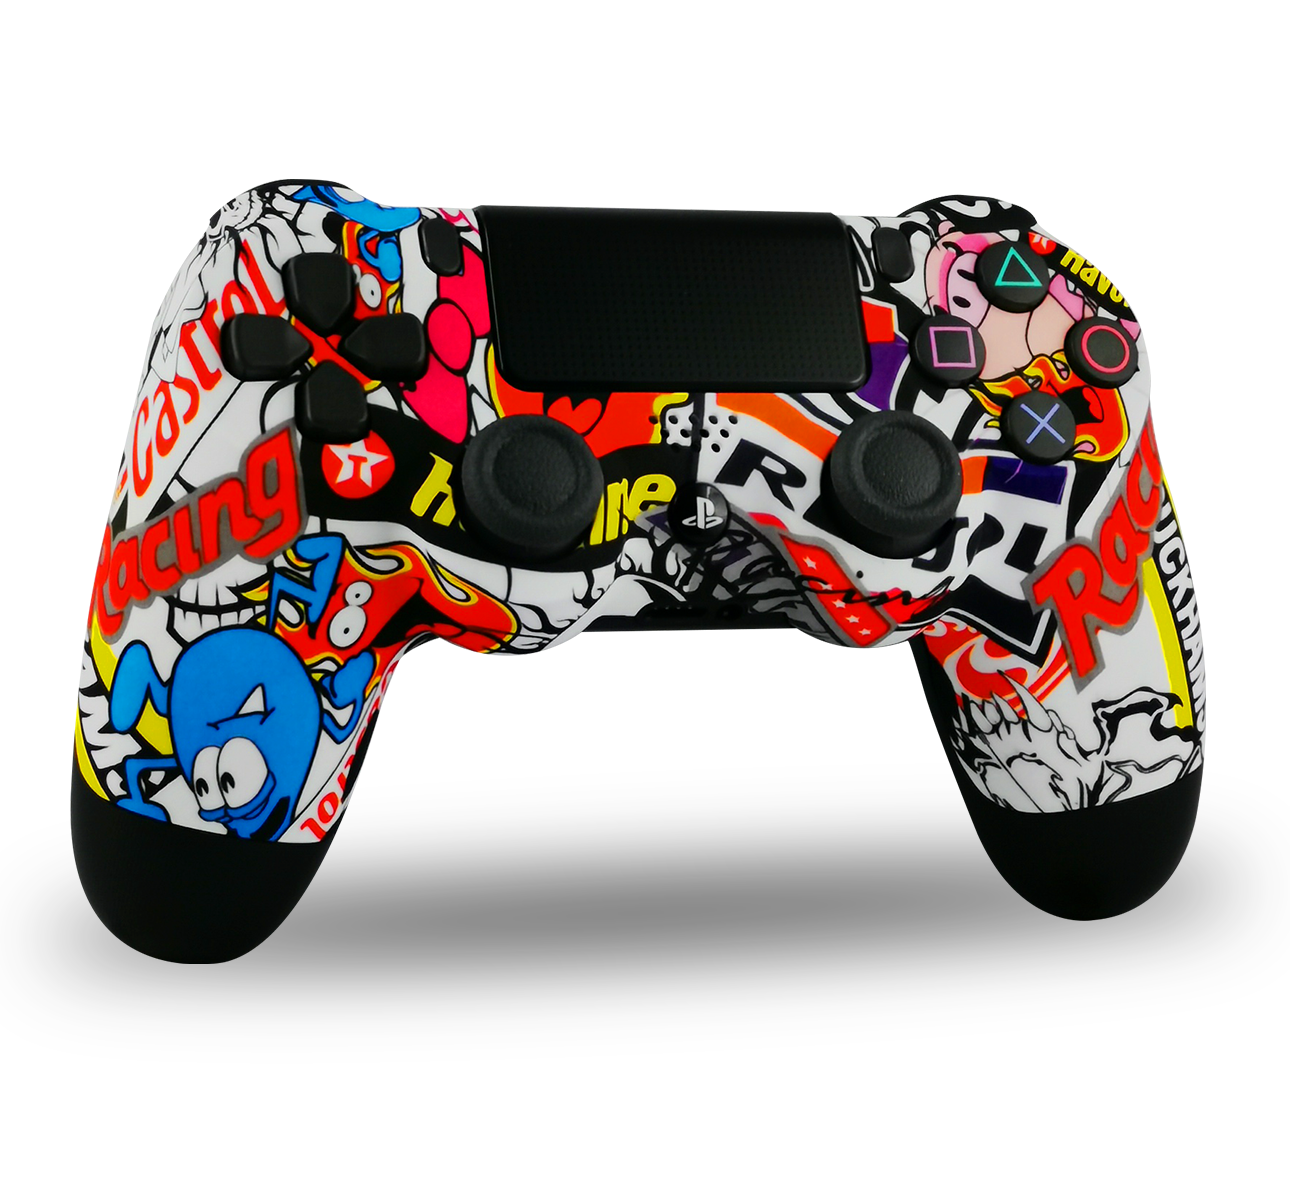 manette-PS4-custom-playstation-4-sony-personnalisee-drawmypad-riders-on-the-storm